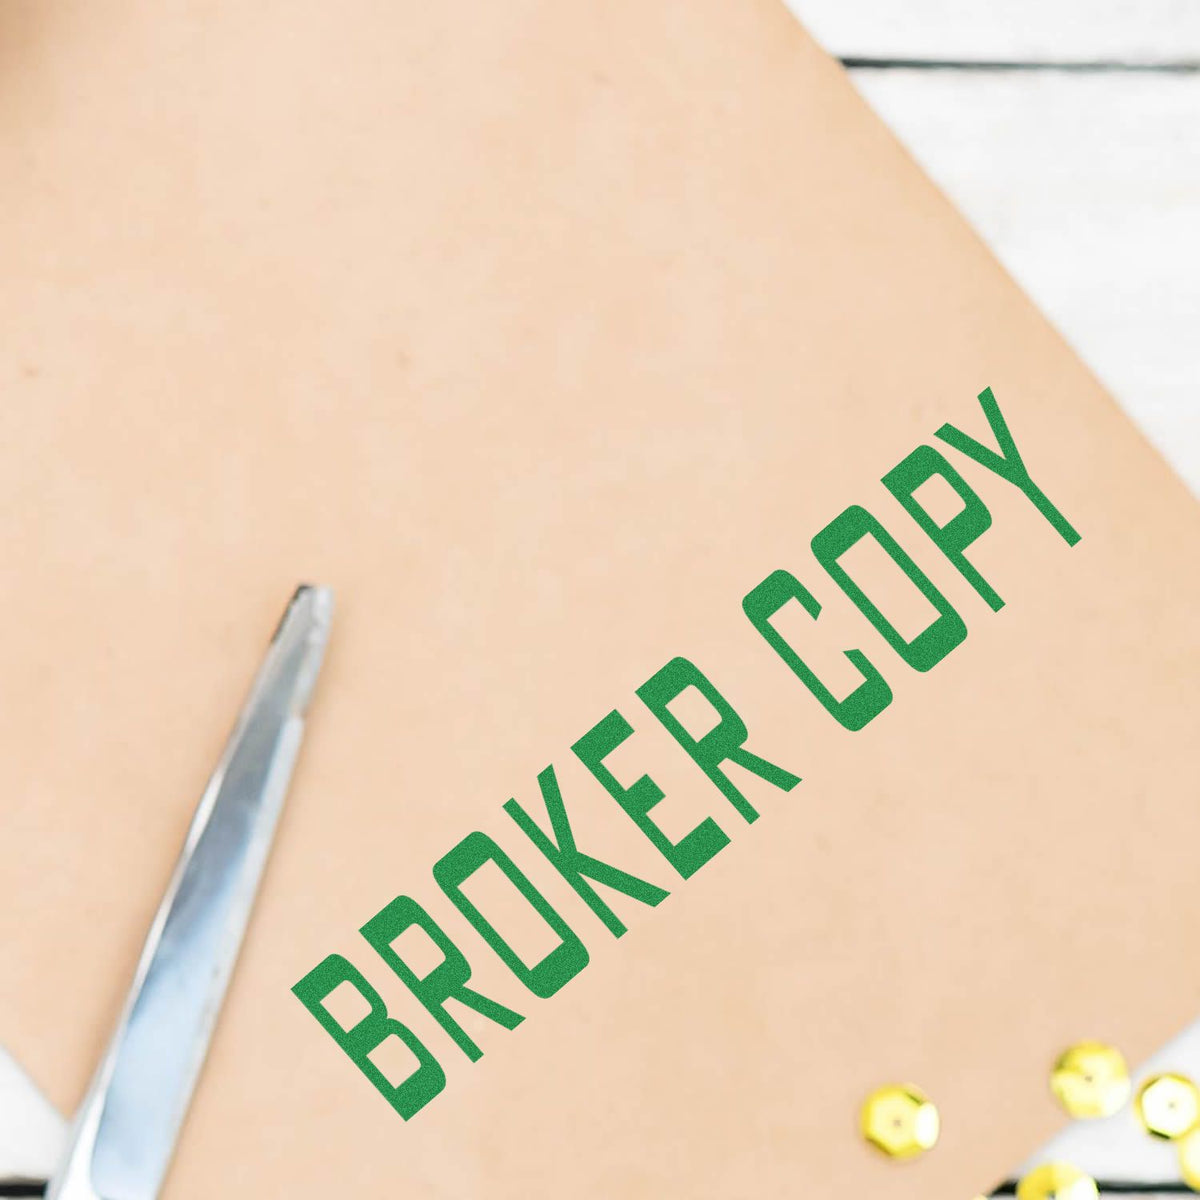 Large Broker Copy Rubber Stamp In Use